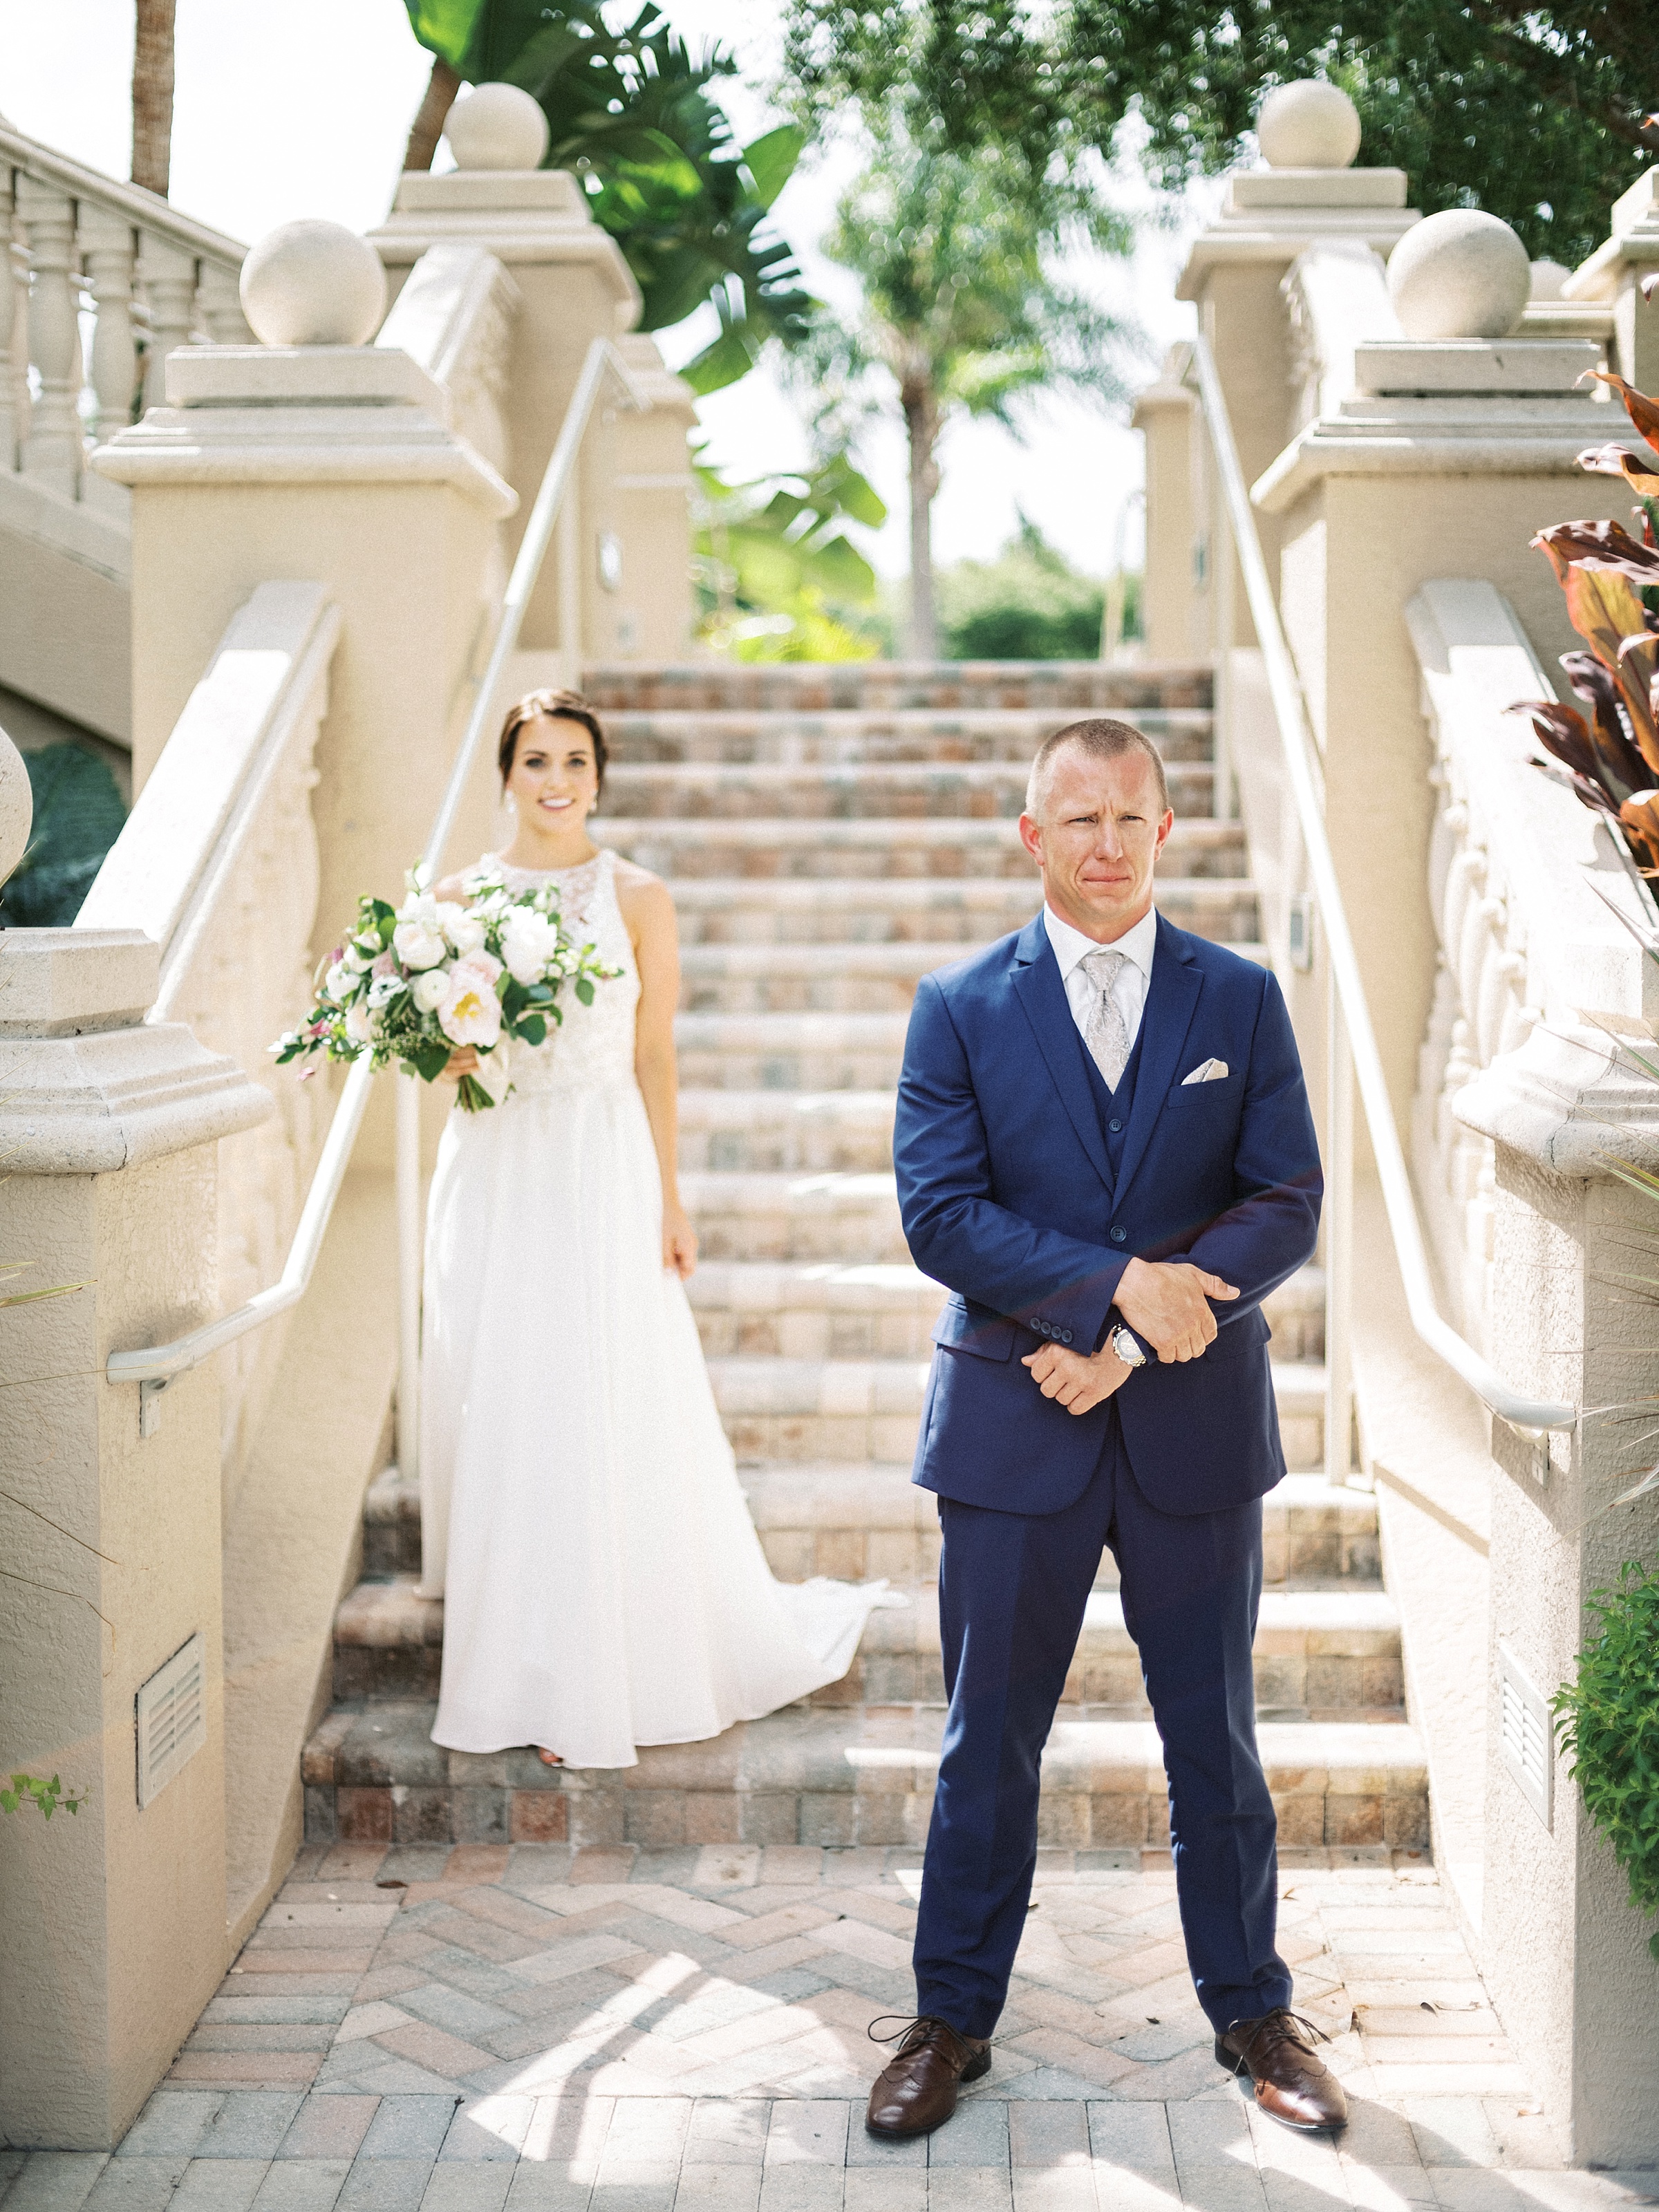 Club at the strand naples wedding, the strand naples wedding, naples wedding photographer, first look photo on stairs 